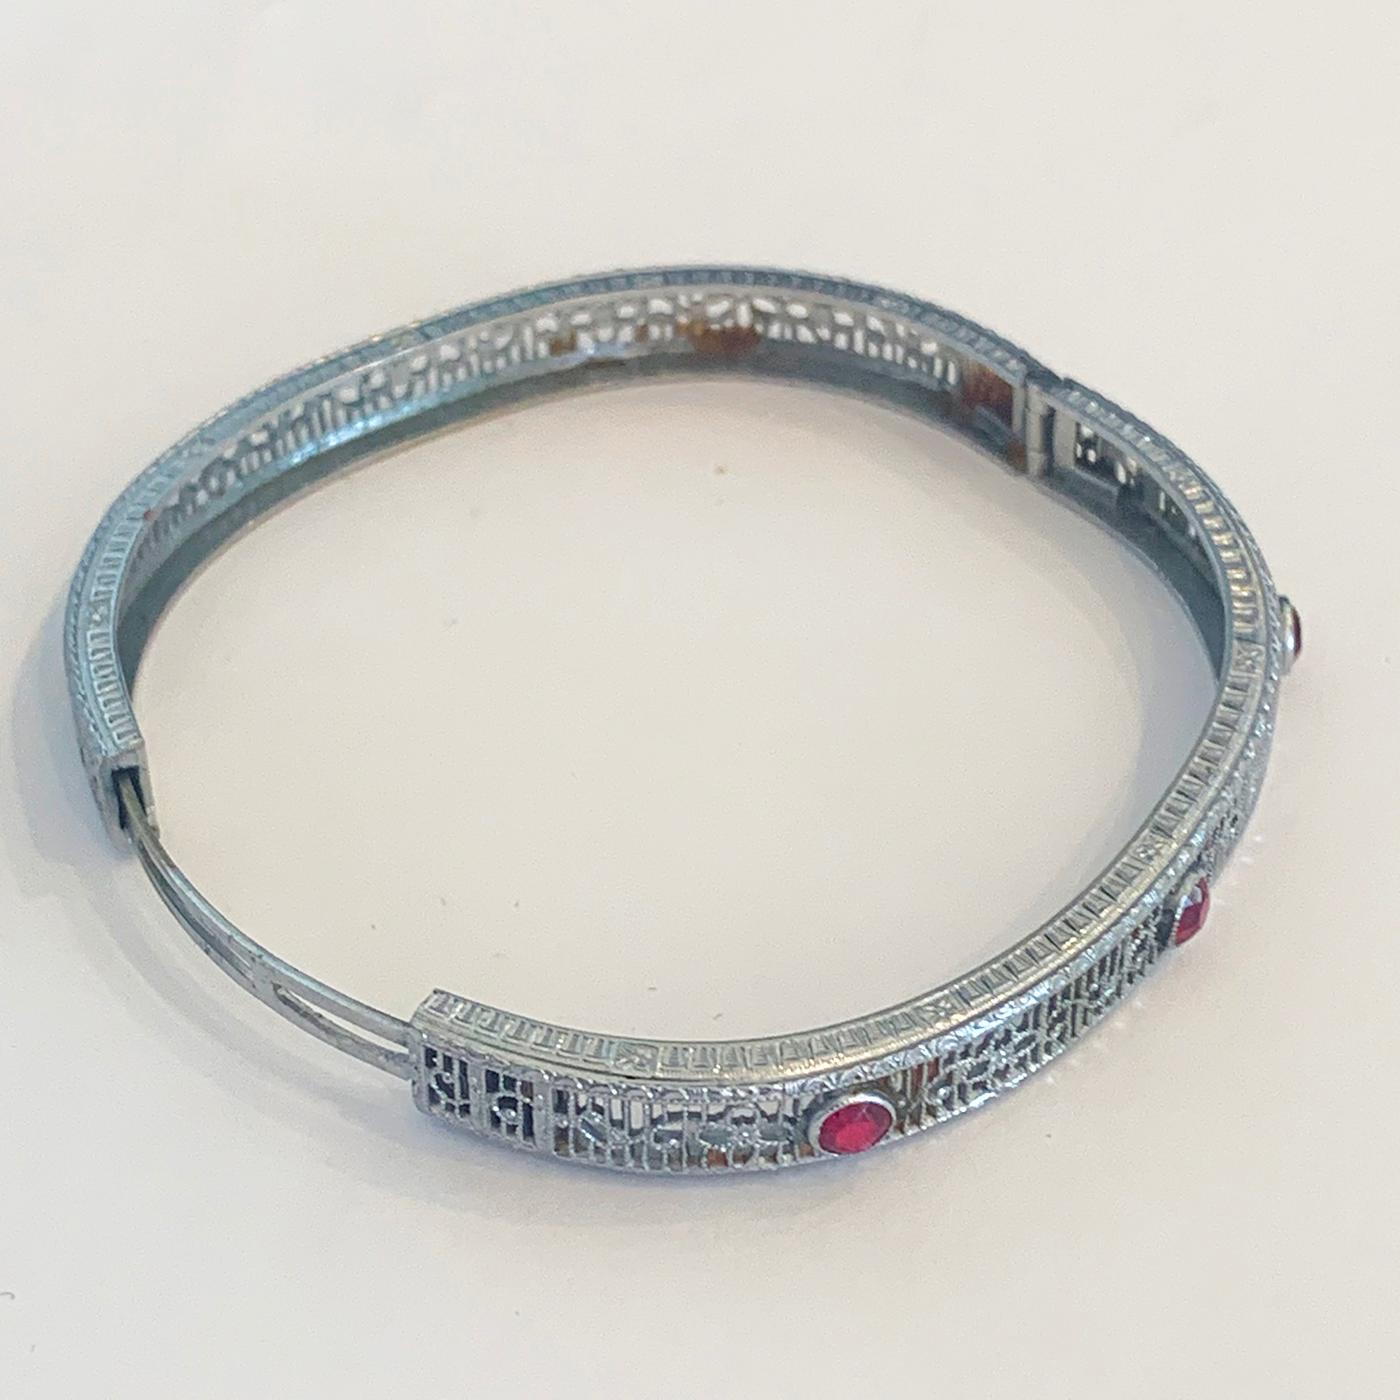 Art Deco Rhodium Elliptical shaped, delicate design Bangle, set with 3 Red Paste Stones, with Slide Opening Clasp. All in very fine filigree with an etched design to the perimeter on both sides. All in absolute perfect condition, with no damage or